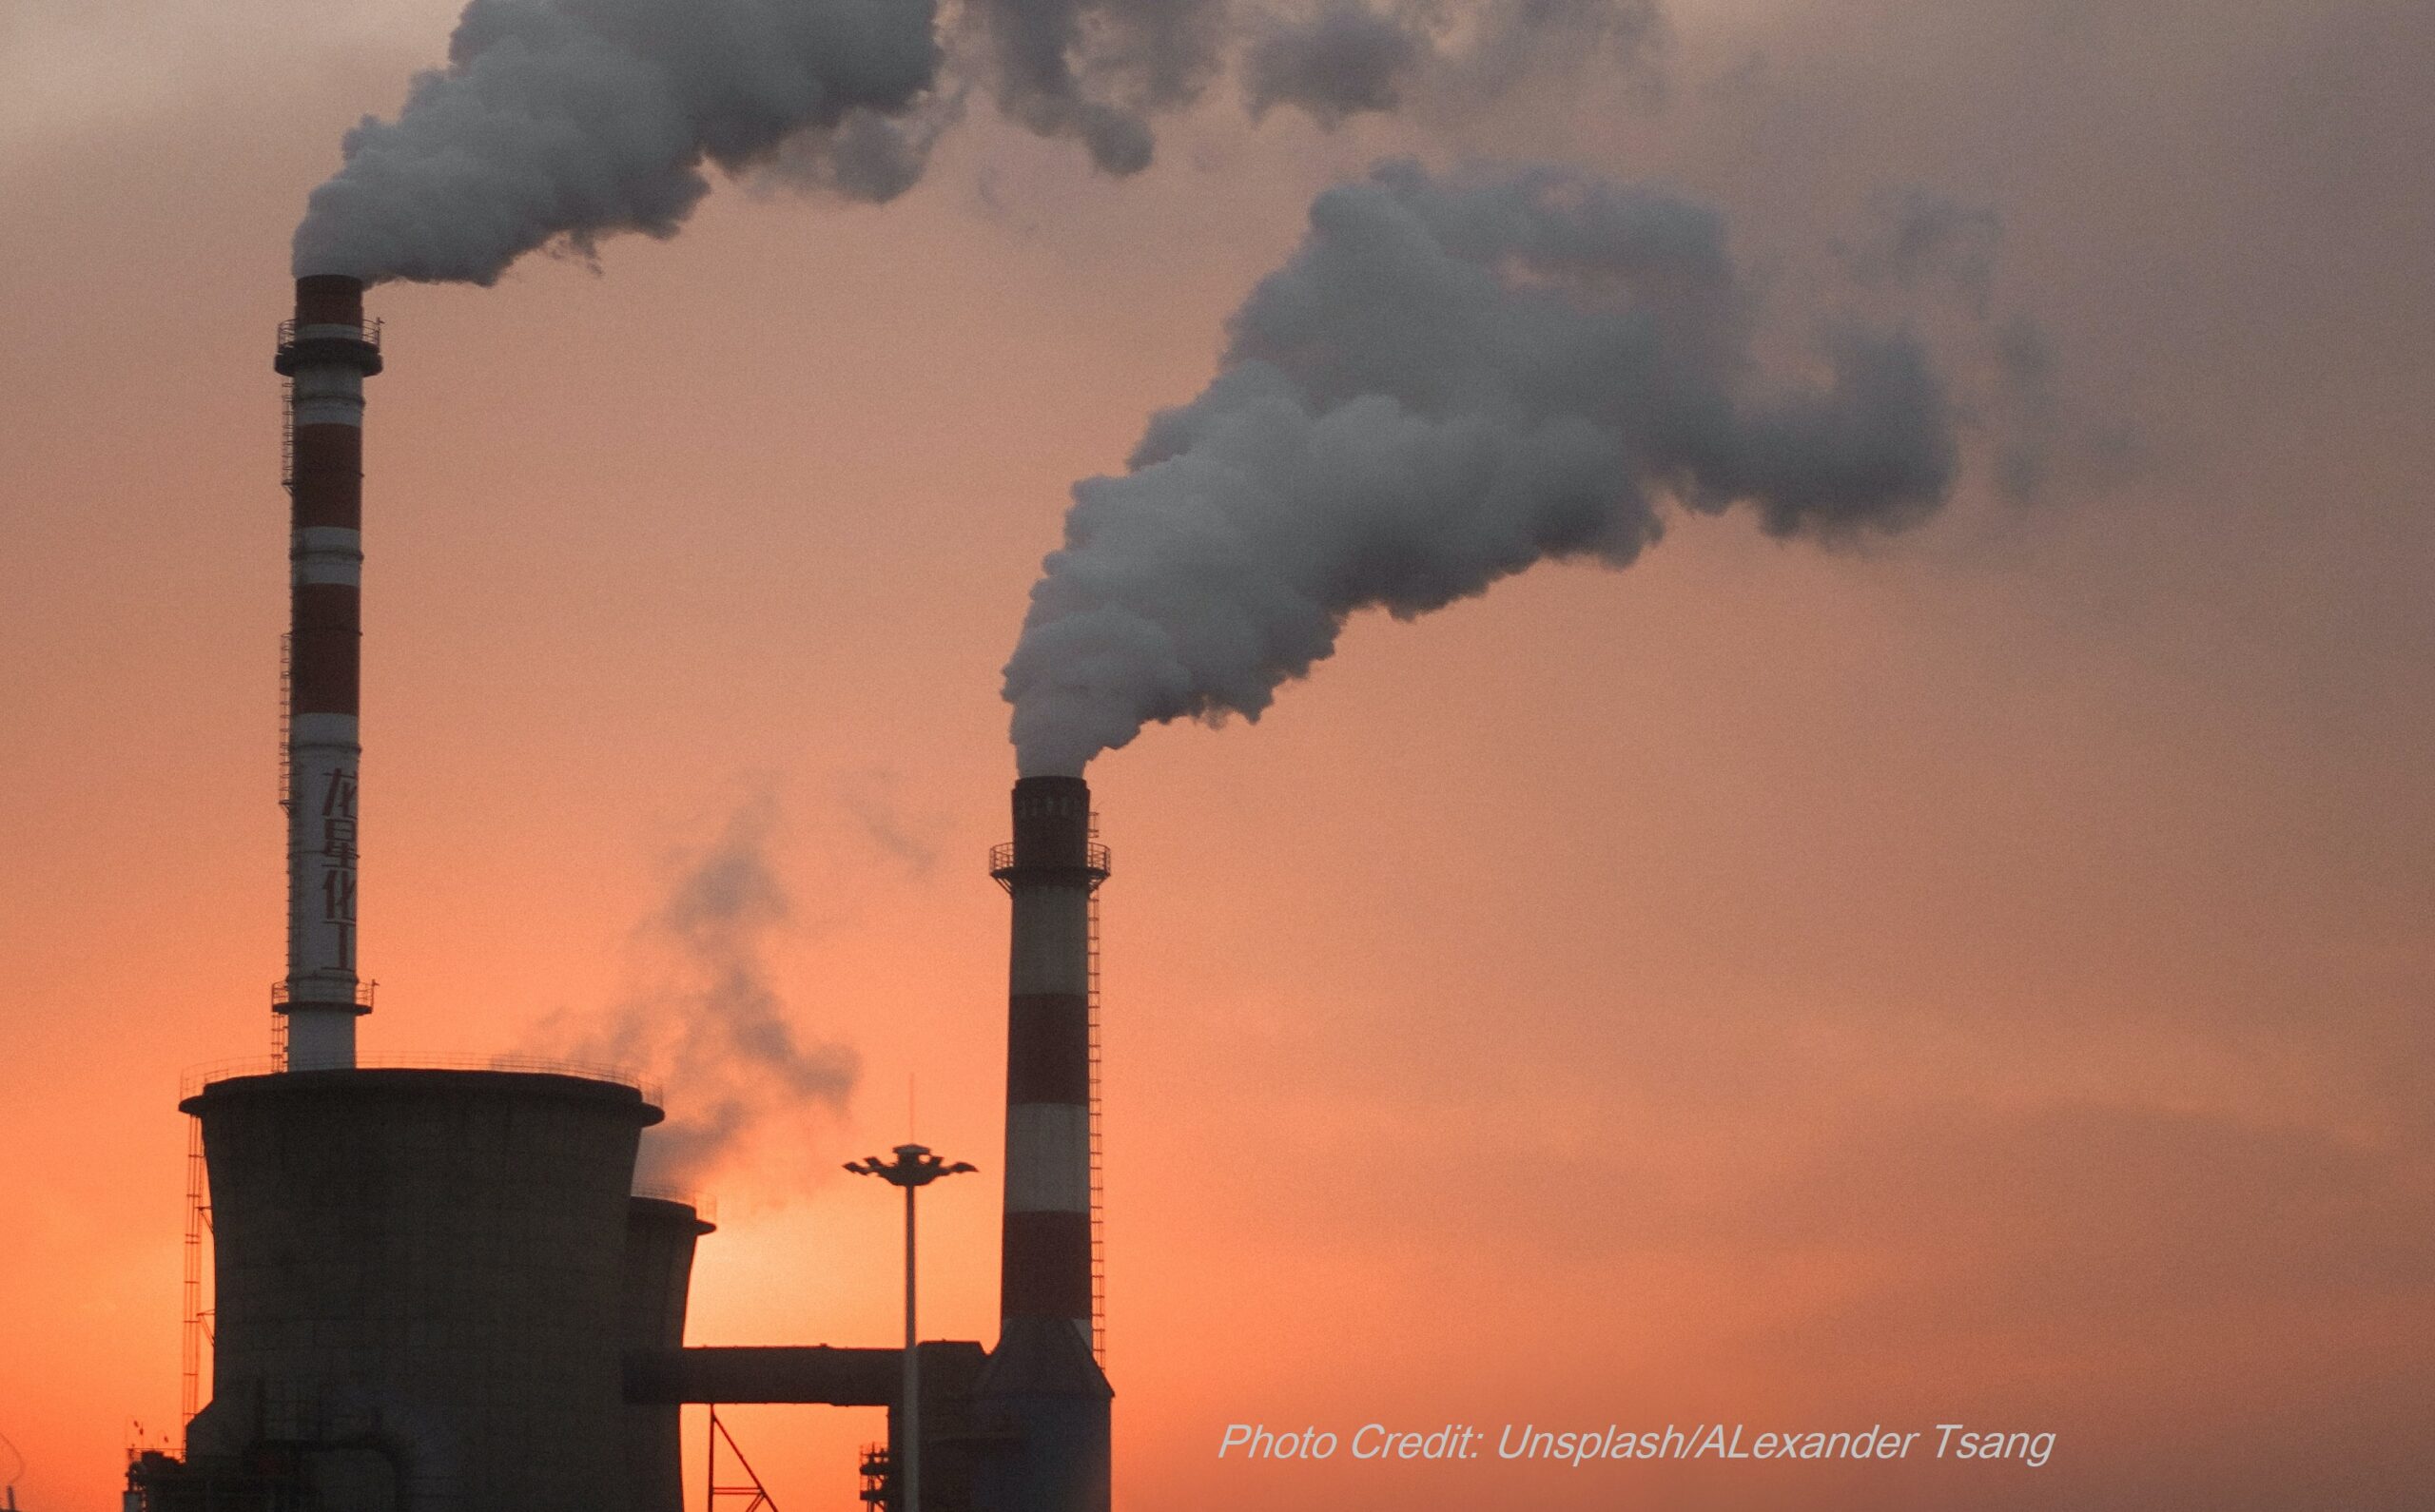 EPA Needs to Strengthen Power Plant Pollution Standards